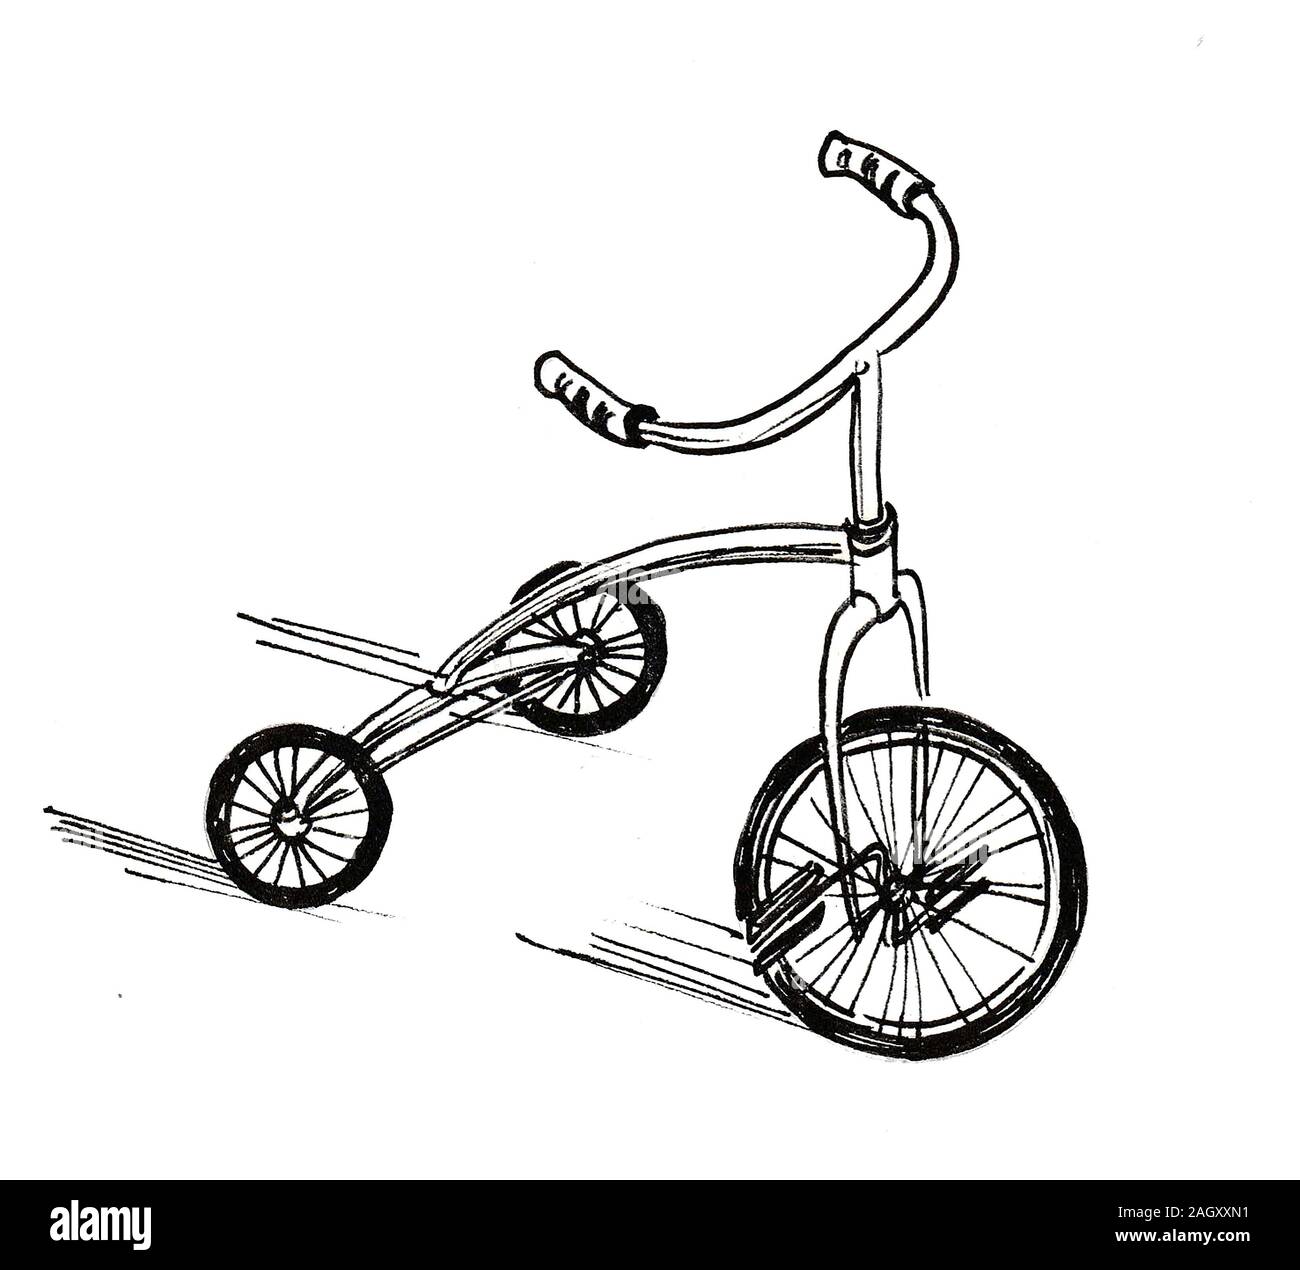 Kids tricycle. Ink black and white drawing Stock Photo - Alamy